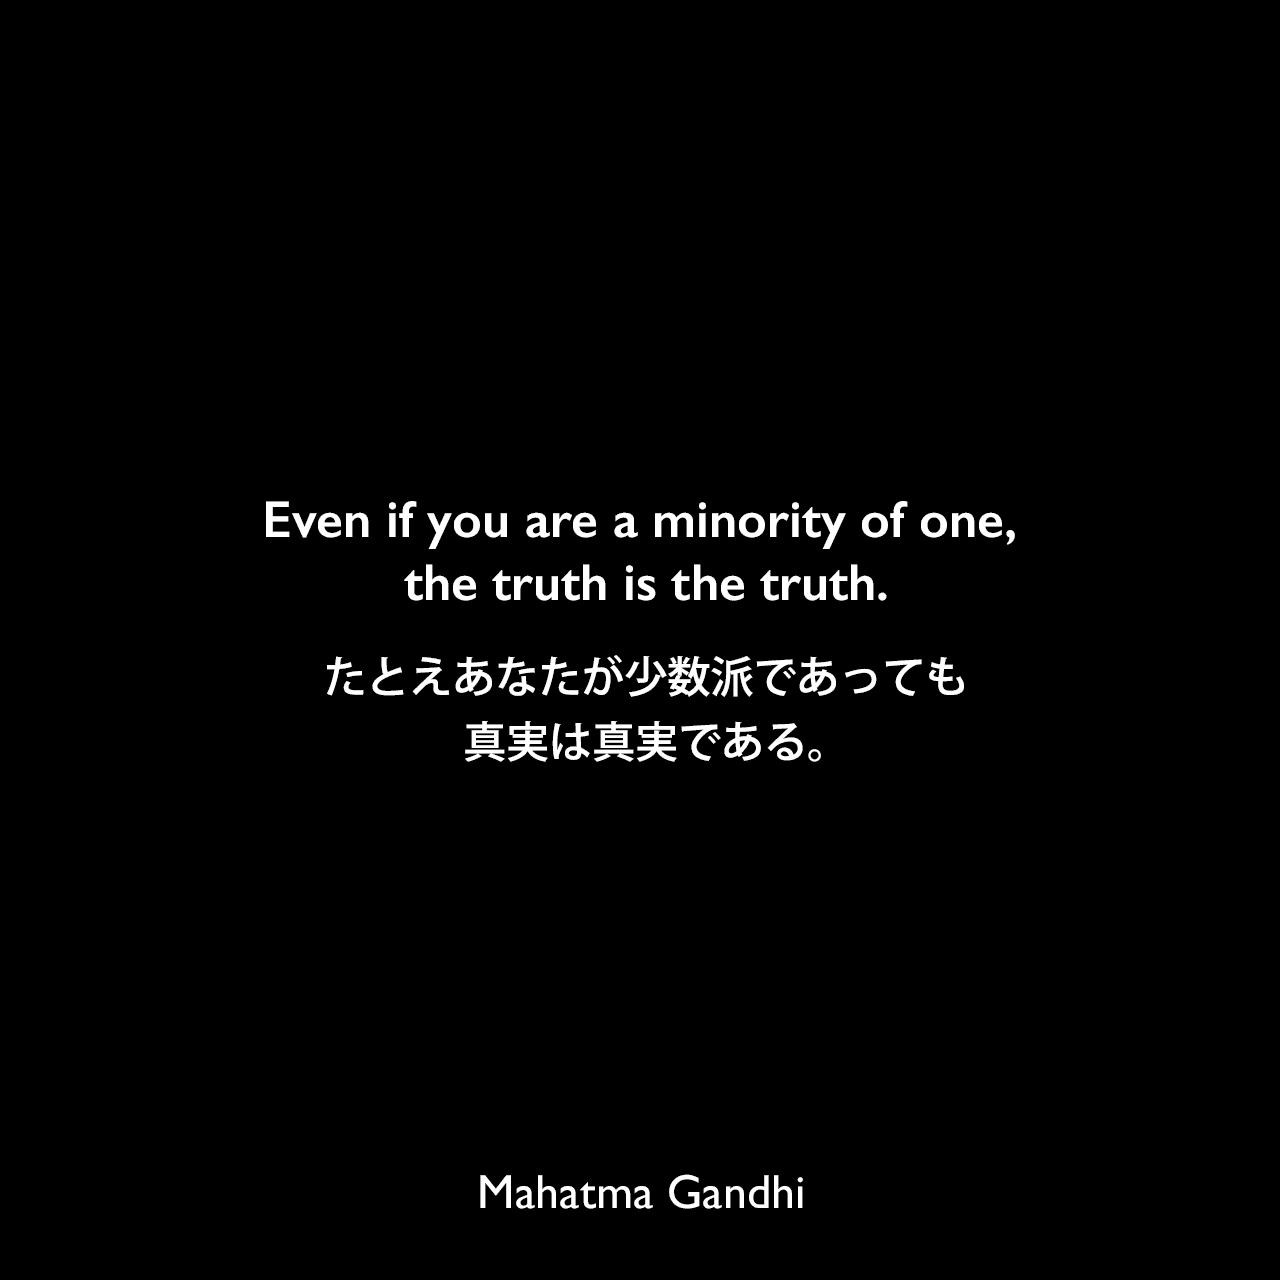 Even if you are a minority of one, the truth is the truth.たとえあなたが少数派であっても、真実は真実である。